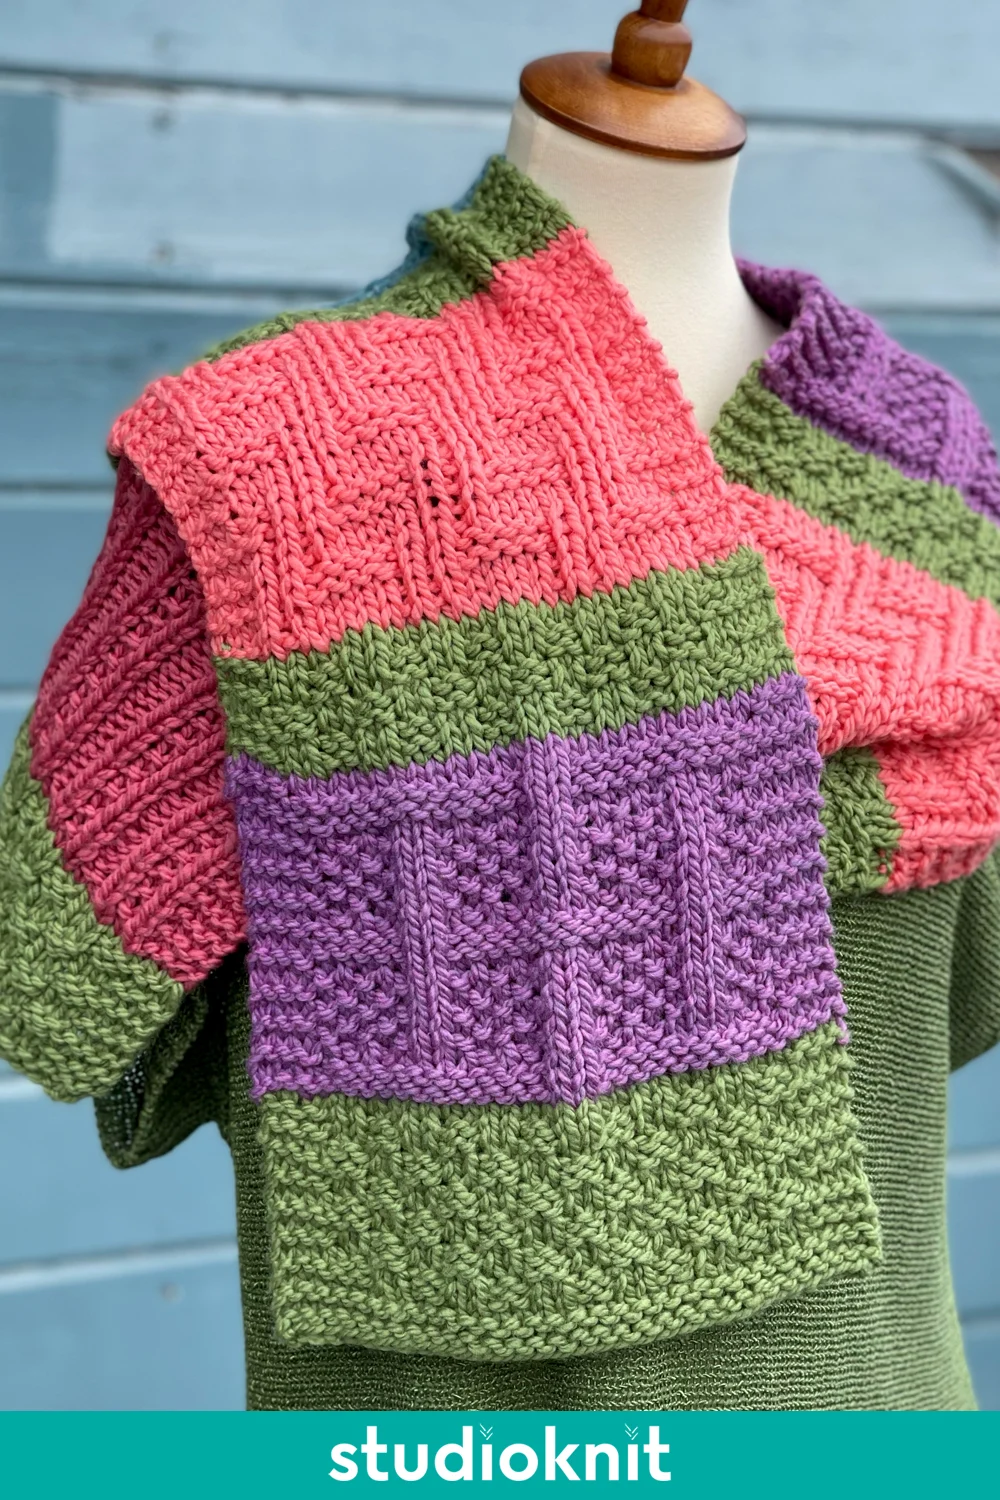 Color Block Knitted Scarf with Lattice Seed Stitch on manequin.